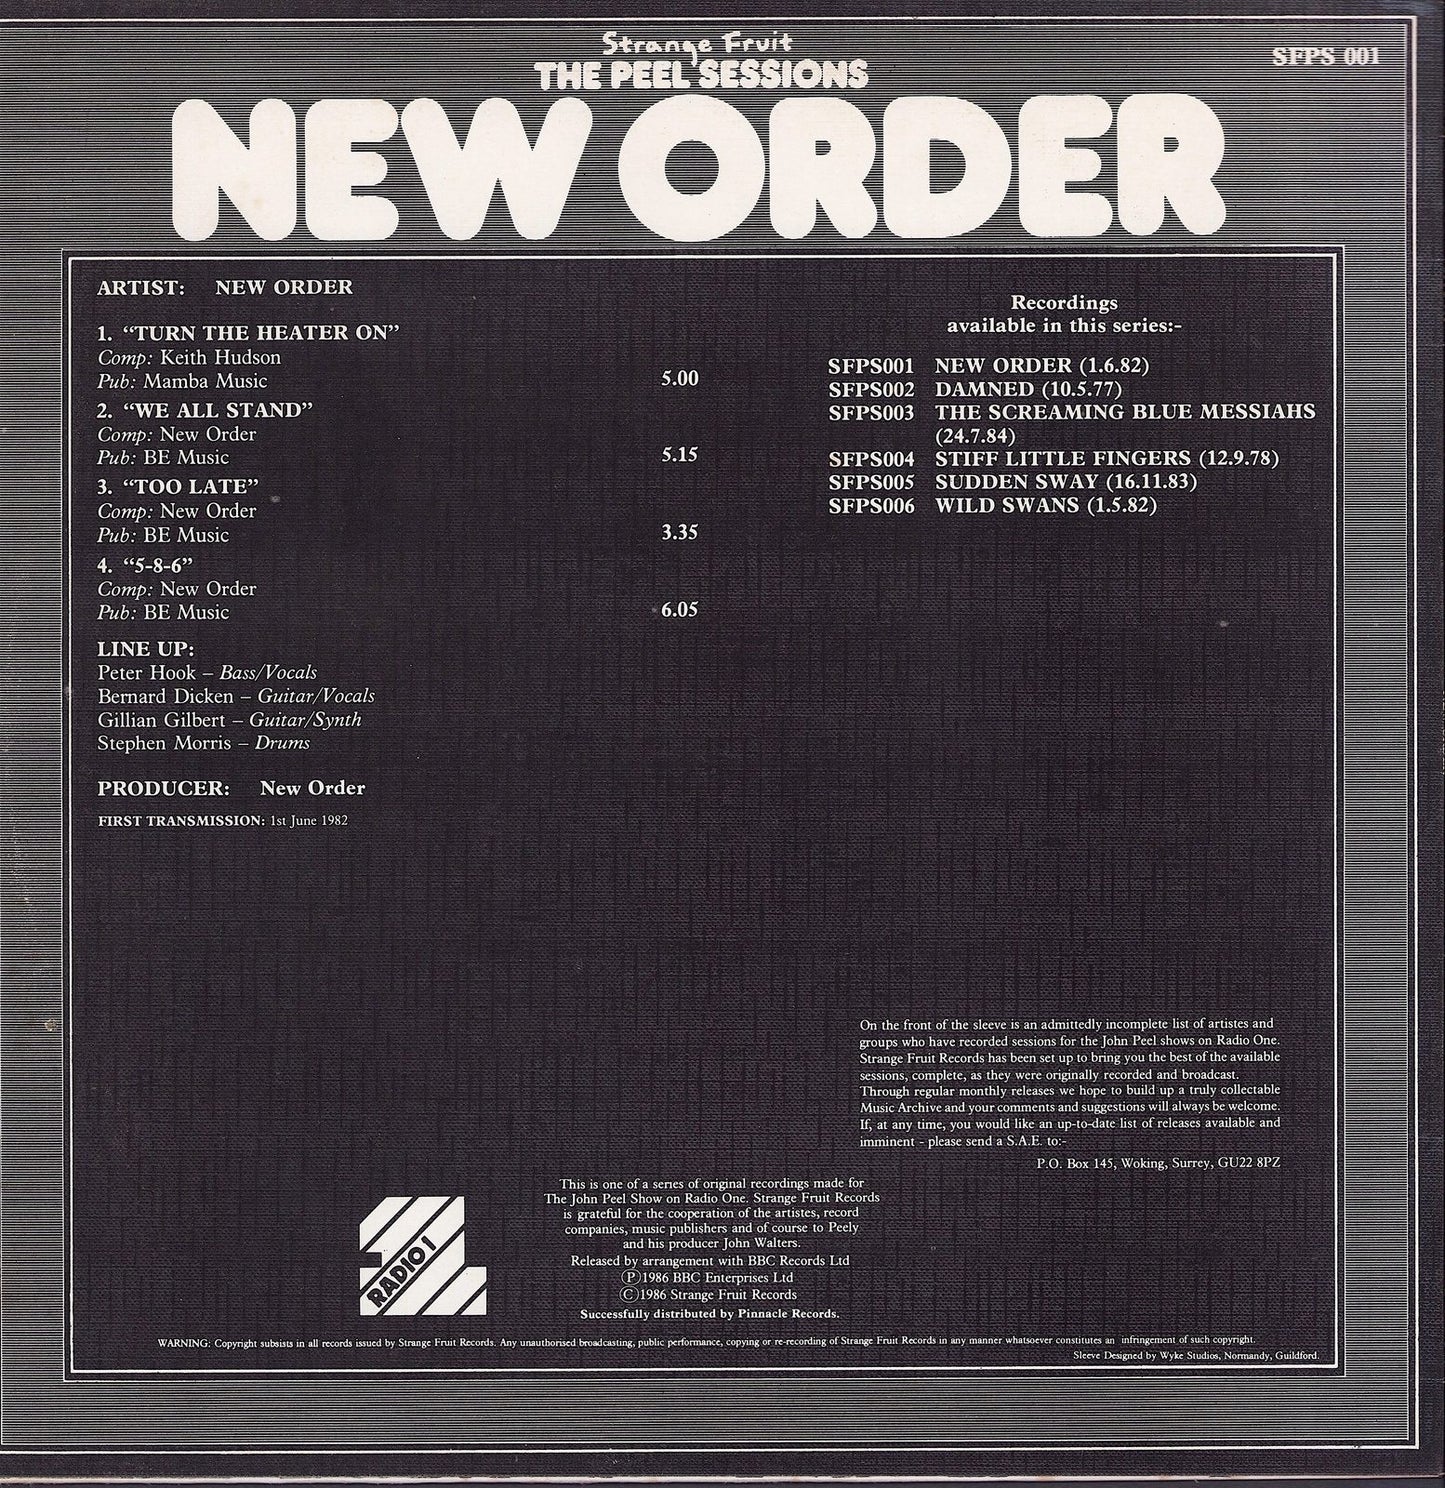 New Order ‎- The Peel Sessions Vinyl 12" Limited Edition